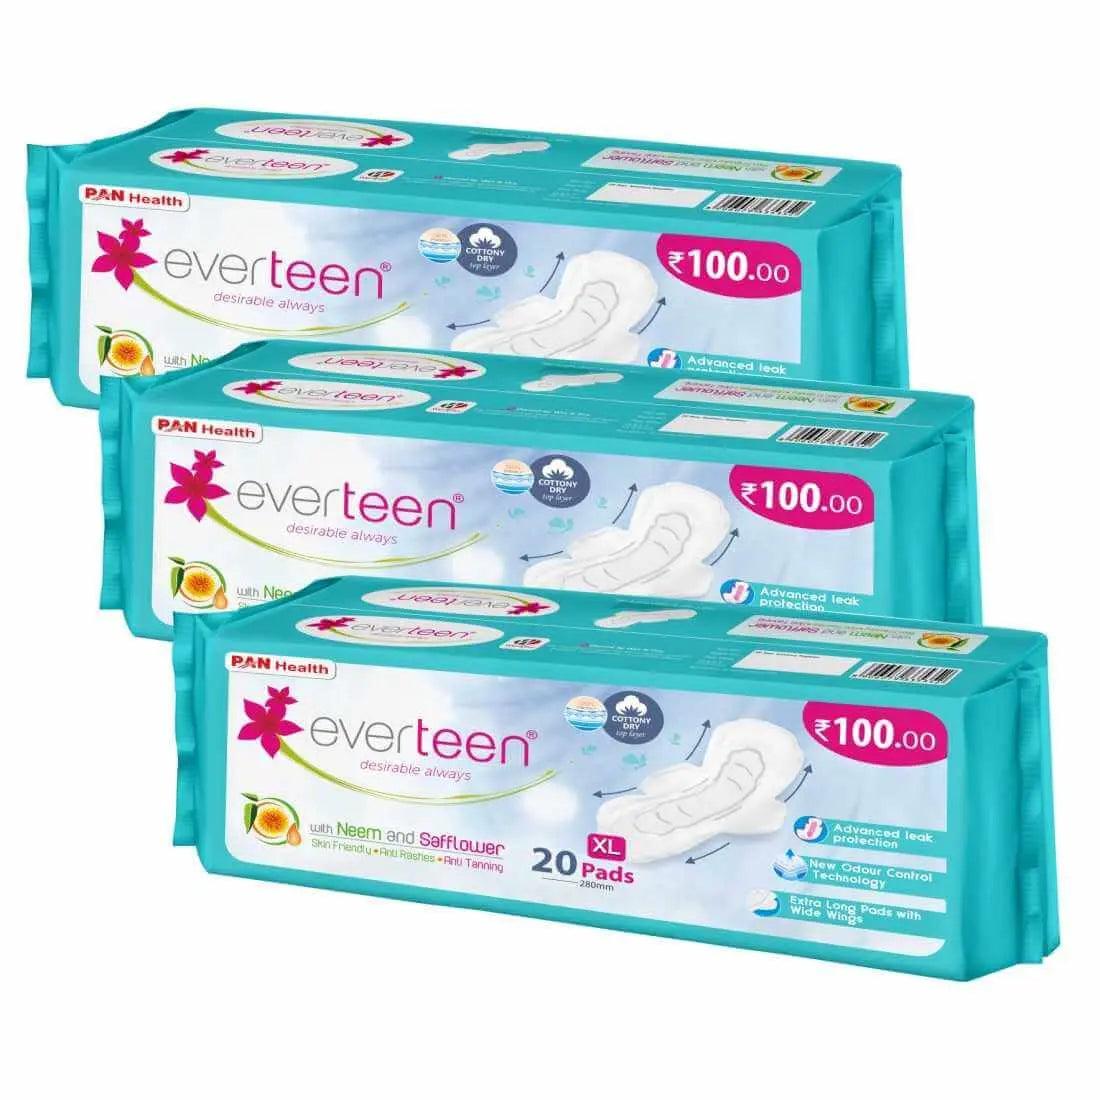 everteen XL Sanitary Napkin Pads with Neem and Safflower for Women - 20 Pads, 280mm 8903540010732